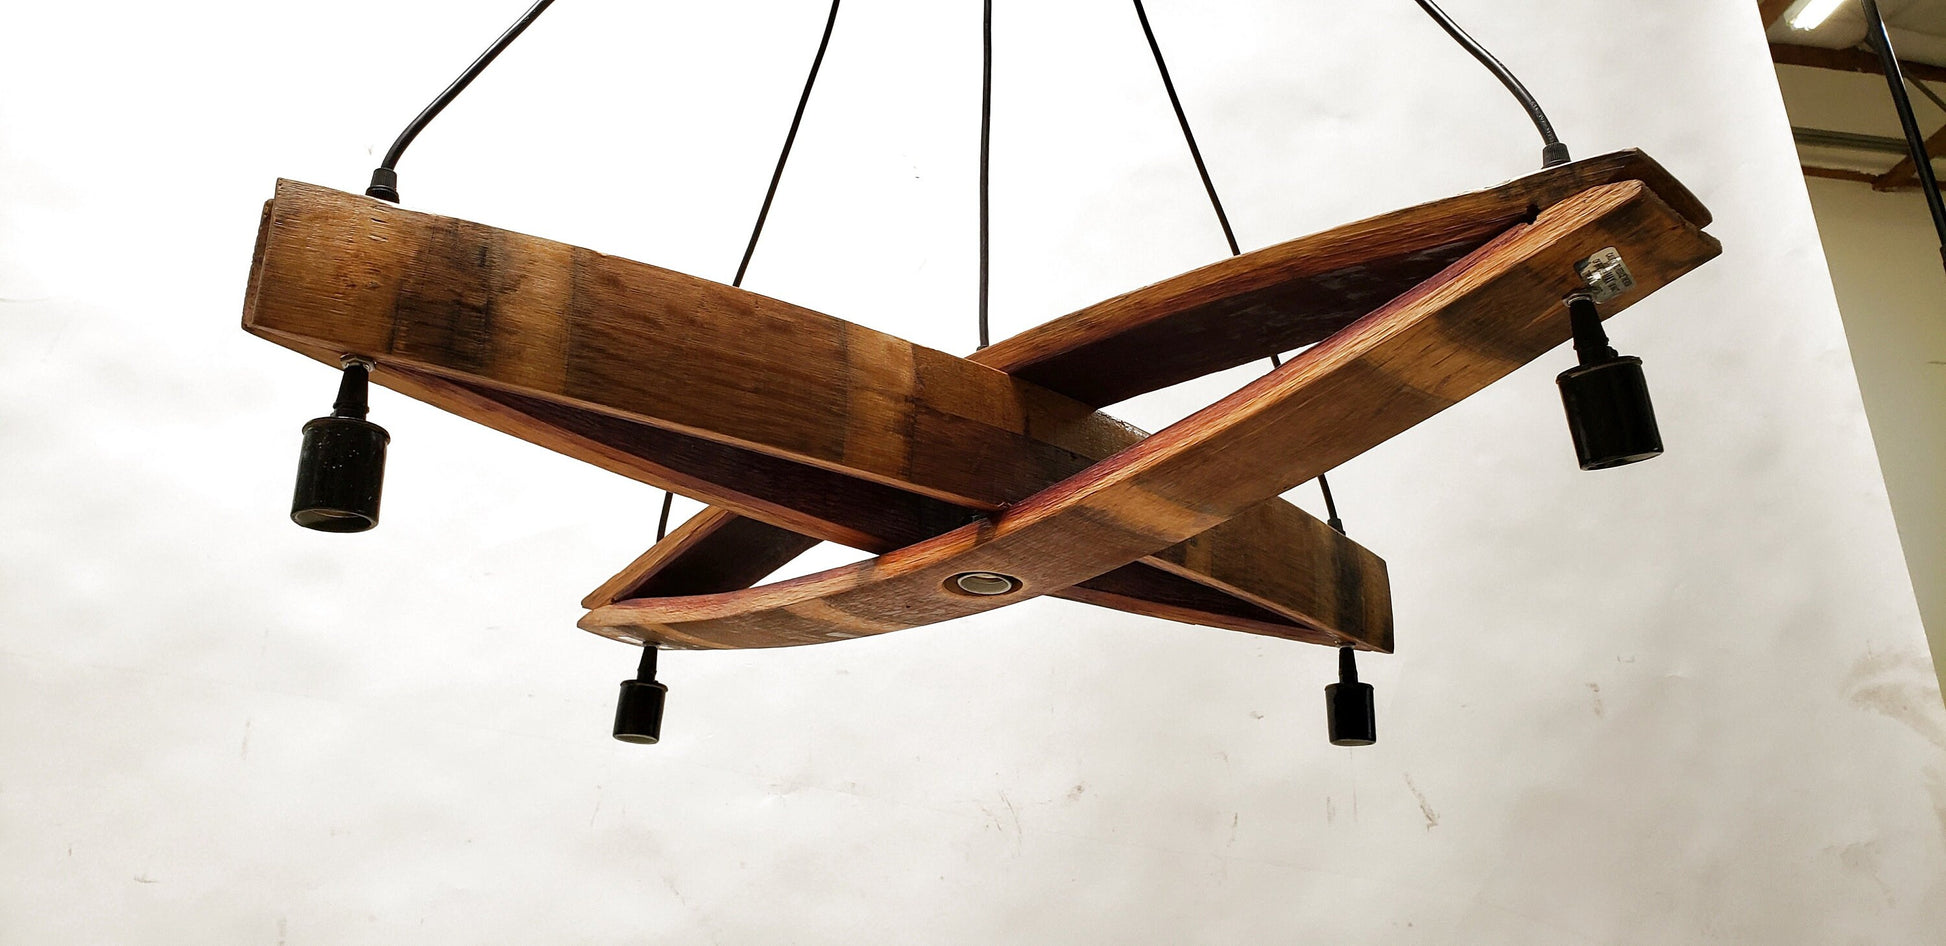 Wine Barrel Stave Chandelier - Kuvu - Made from reclaimed California wine barrels. 100% Recycled!